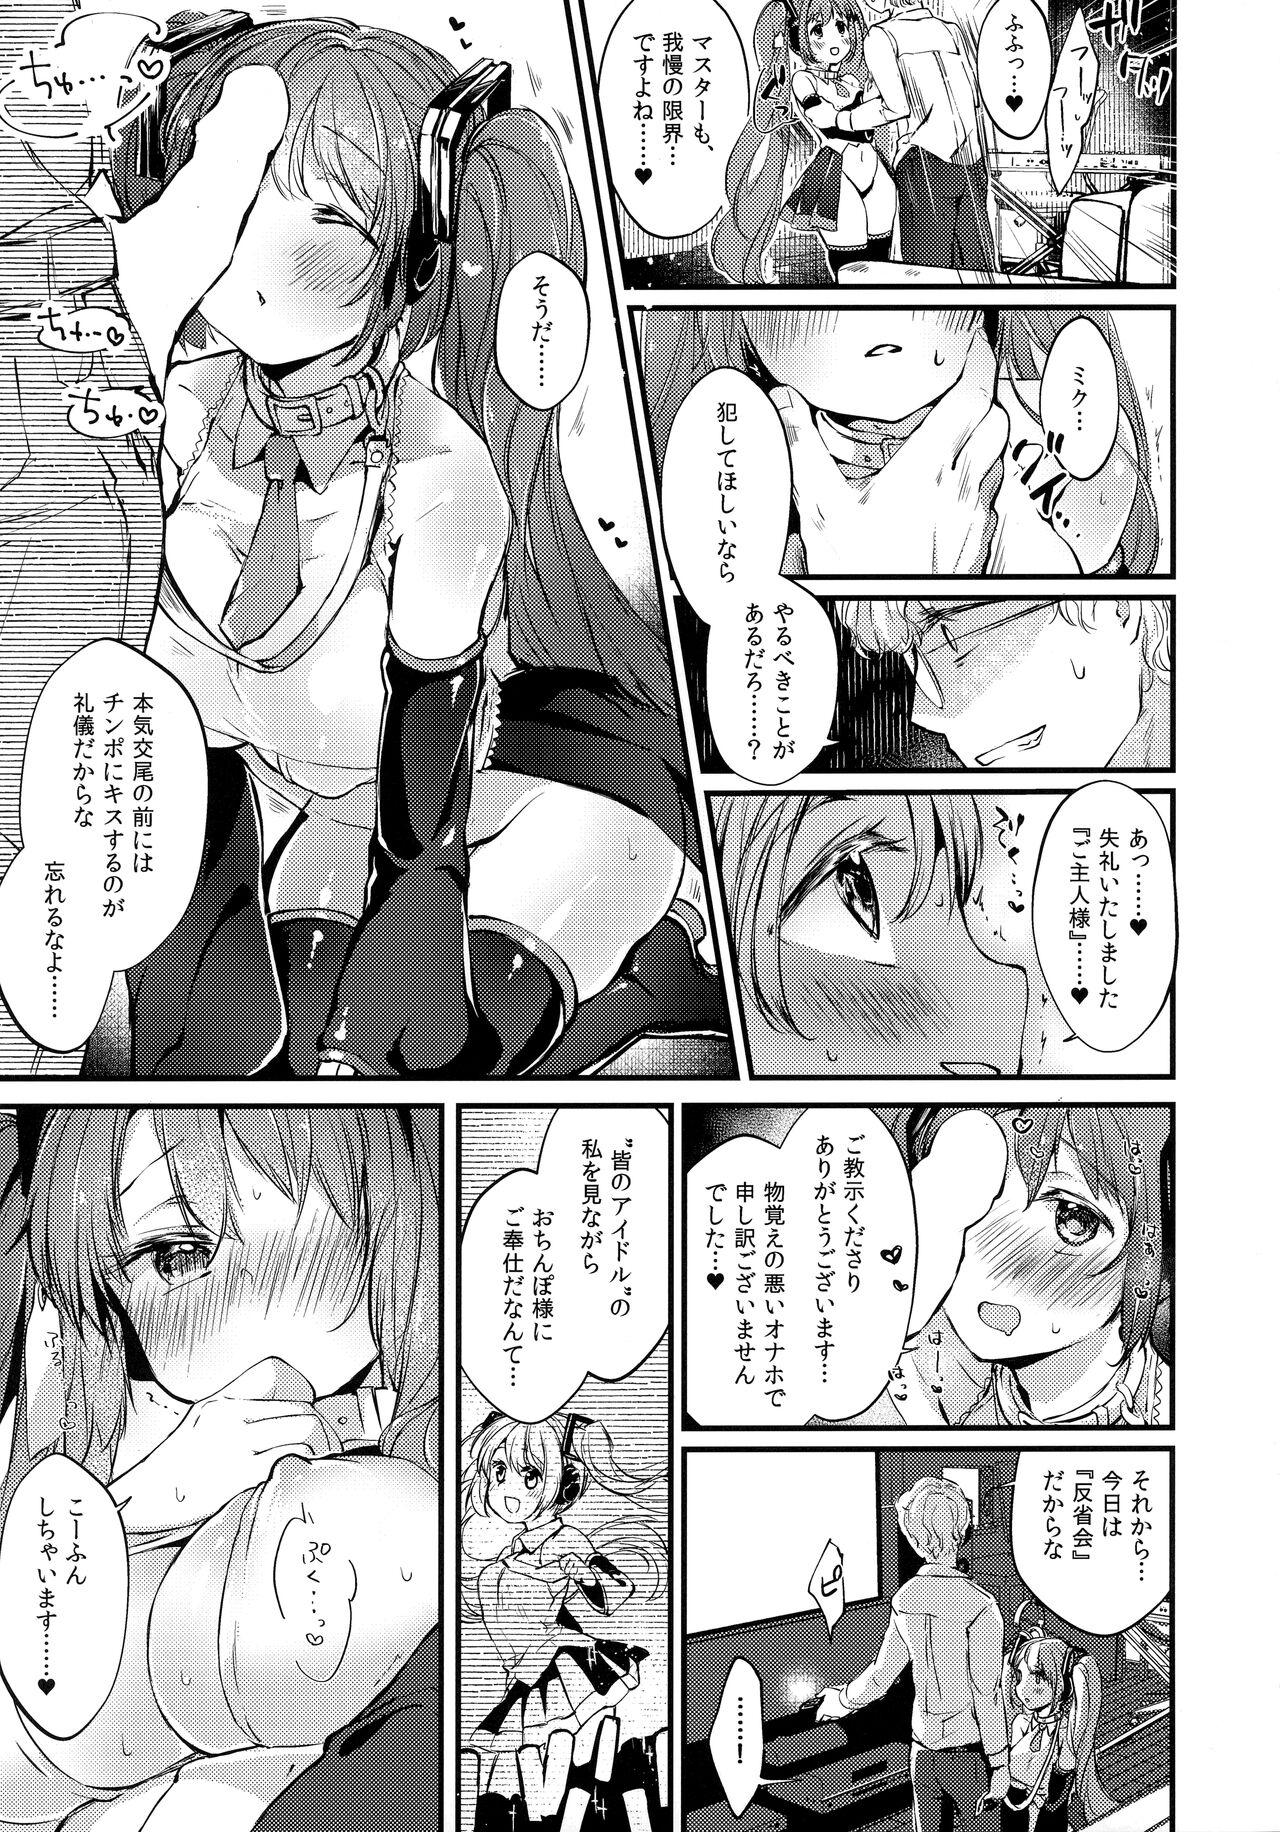 Erotic LOVEROID - Vocaloid Smooth - Page 8